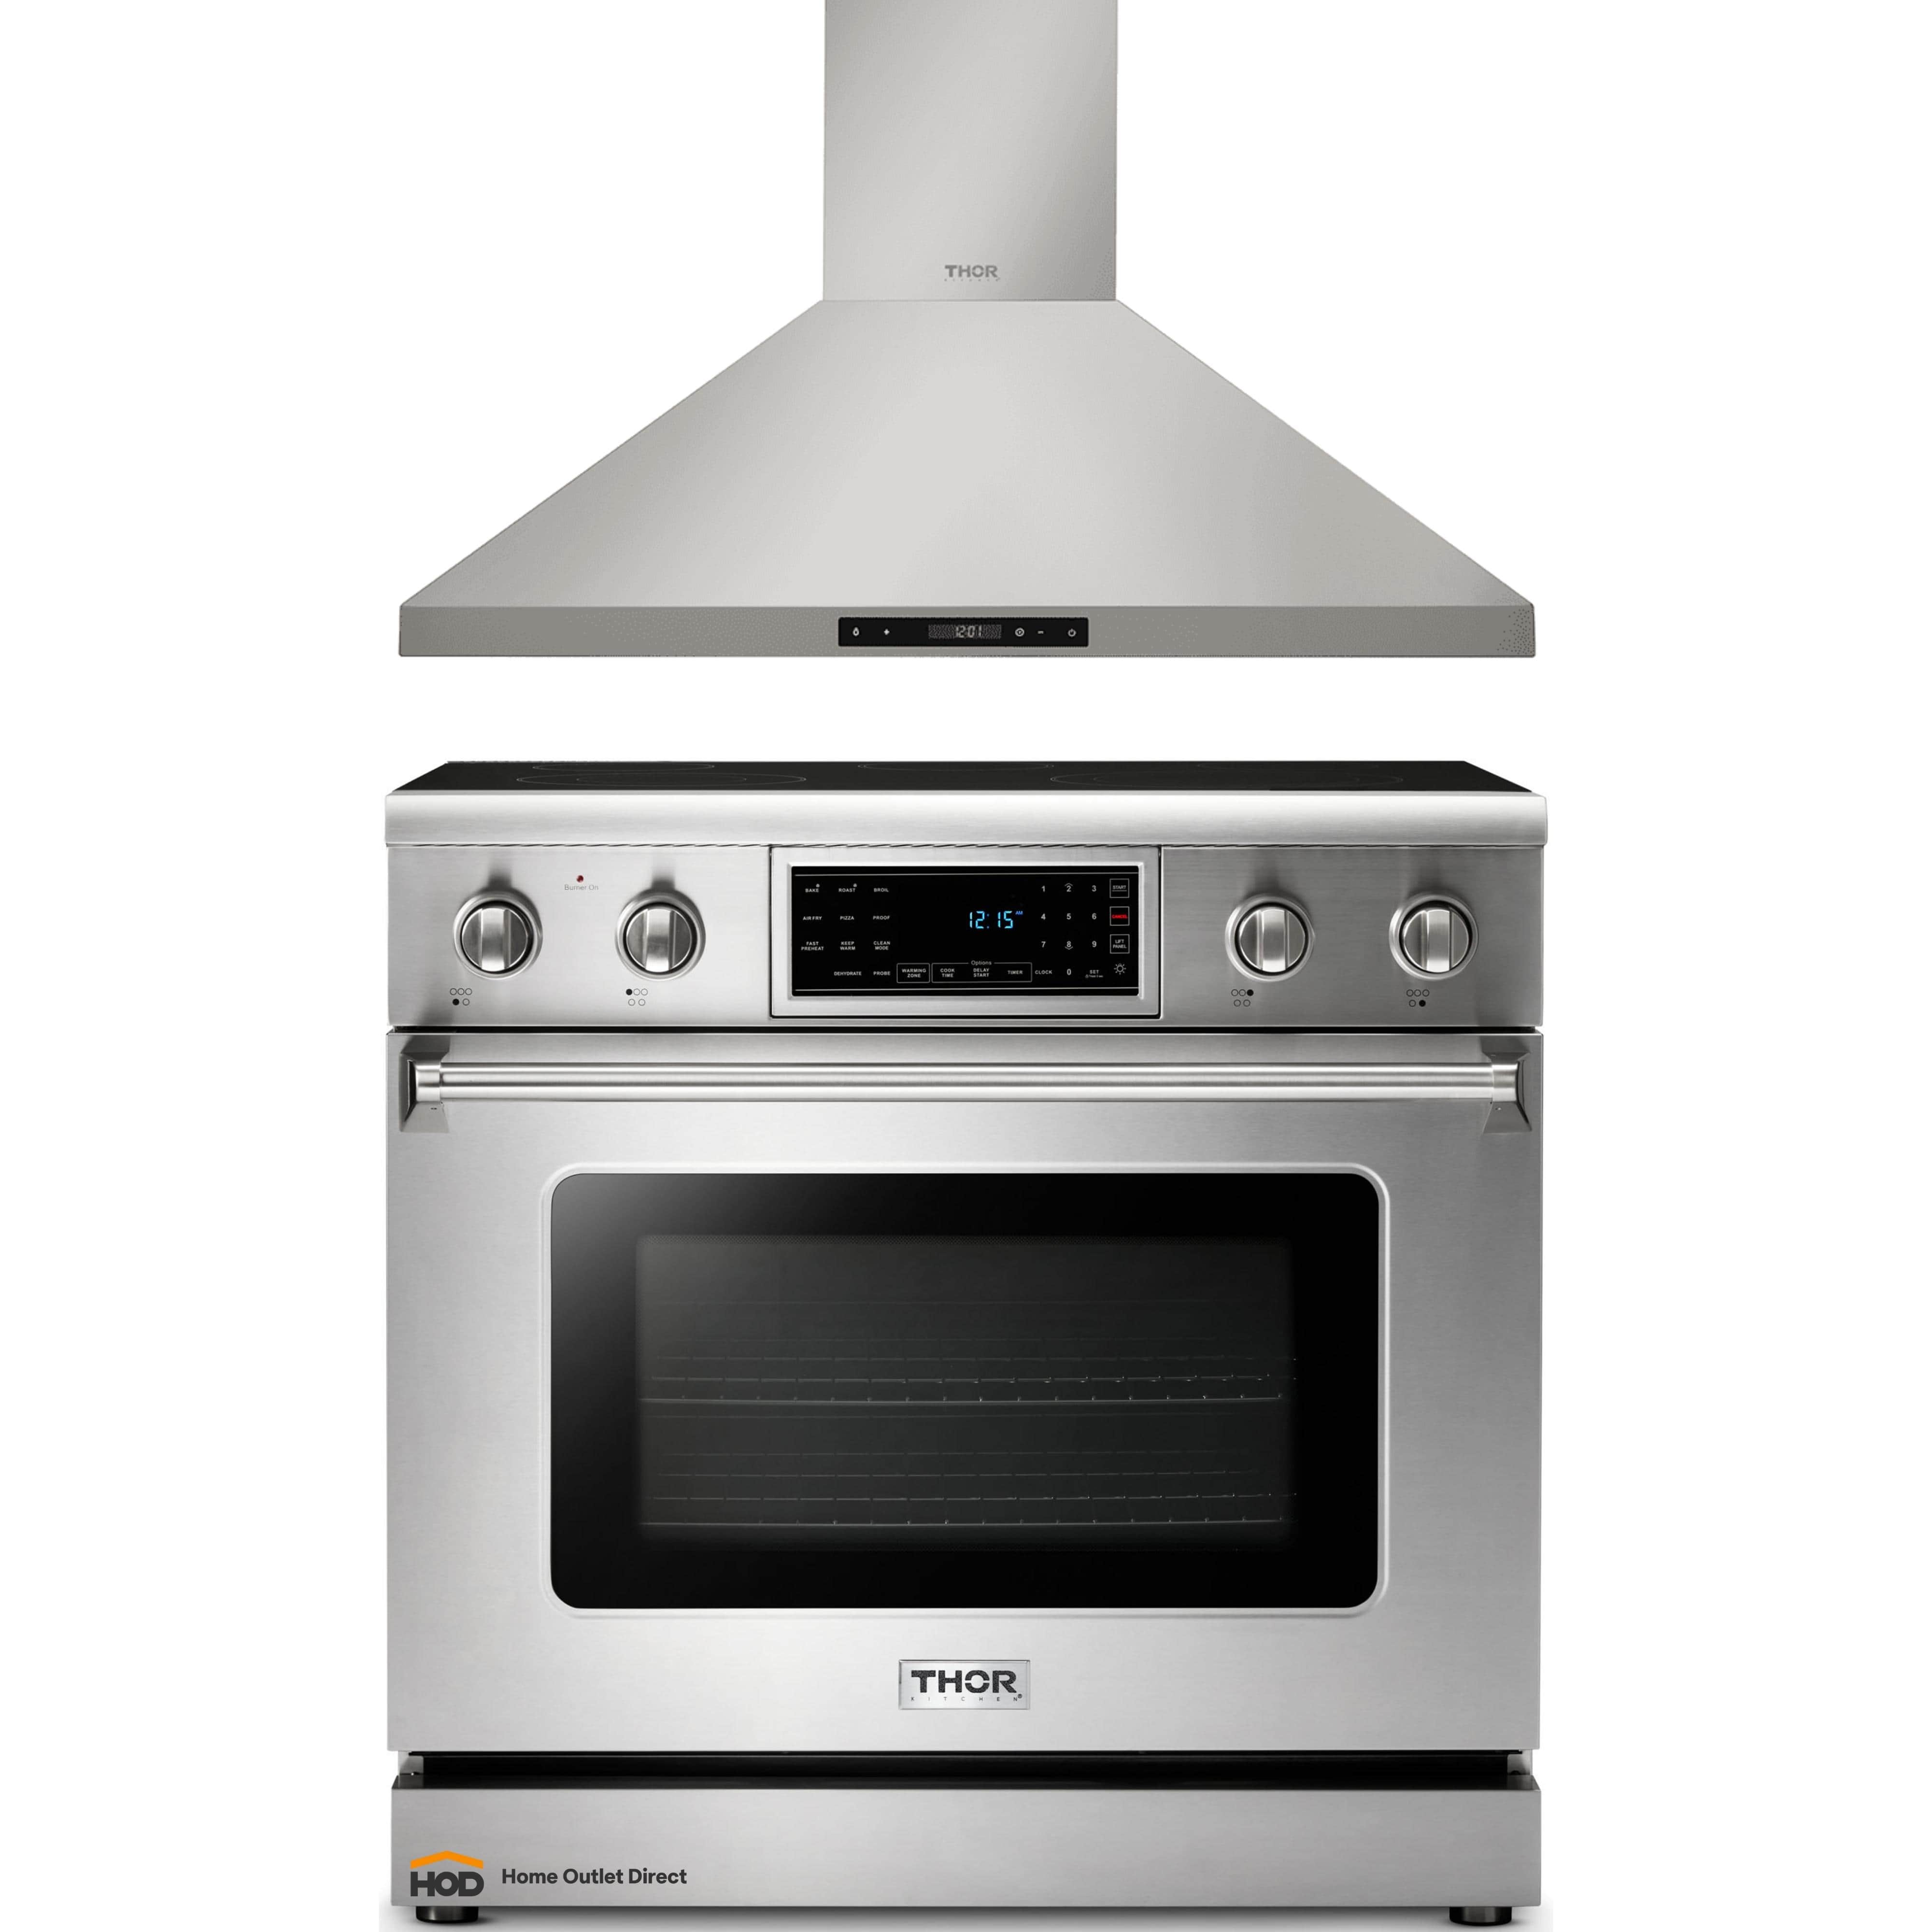 Thor Kitchen 2-Piece Appliance Package - 36-Inch Electric Range with Tilt Panel and Wall Mount Hood in Stainless Steel